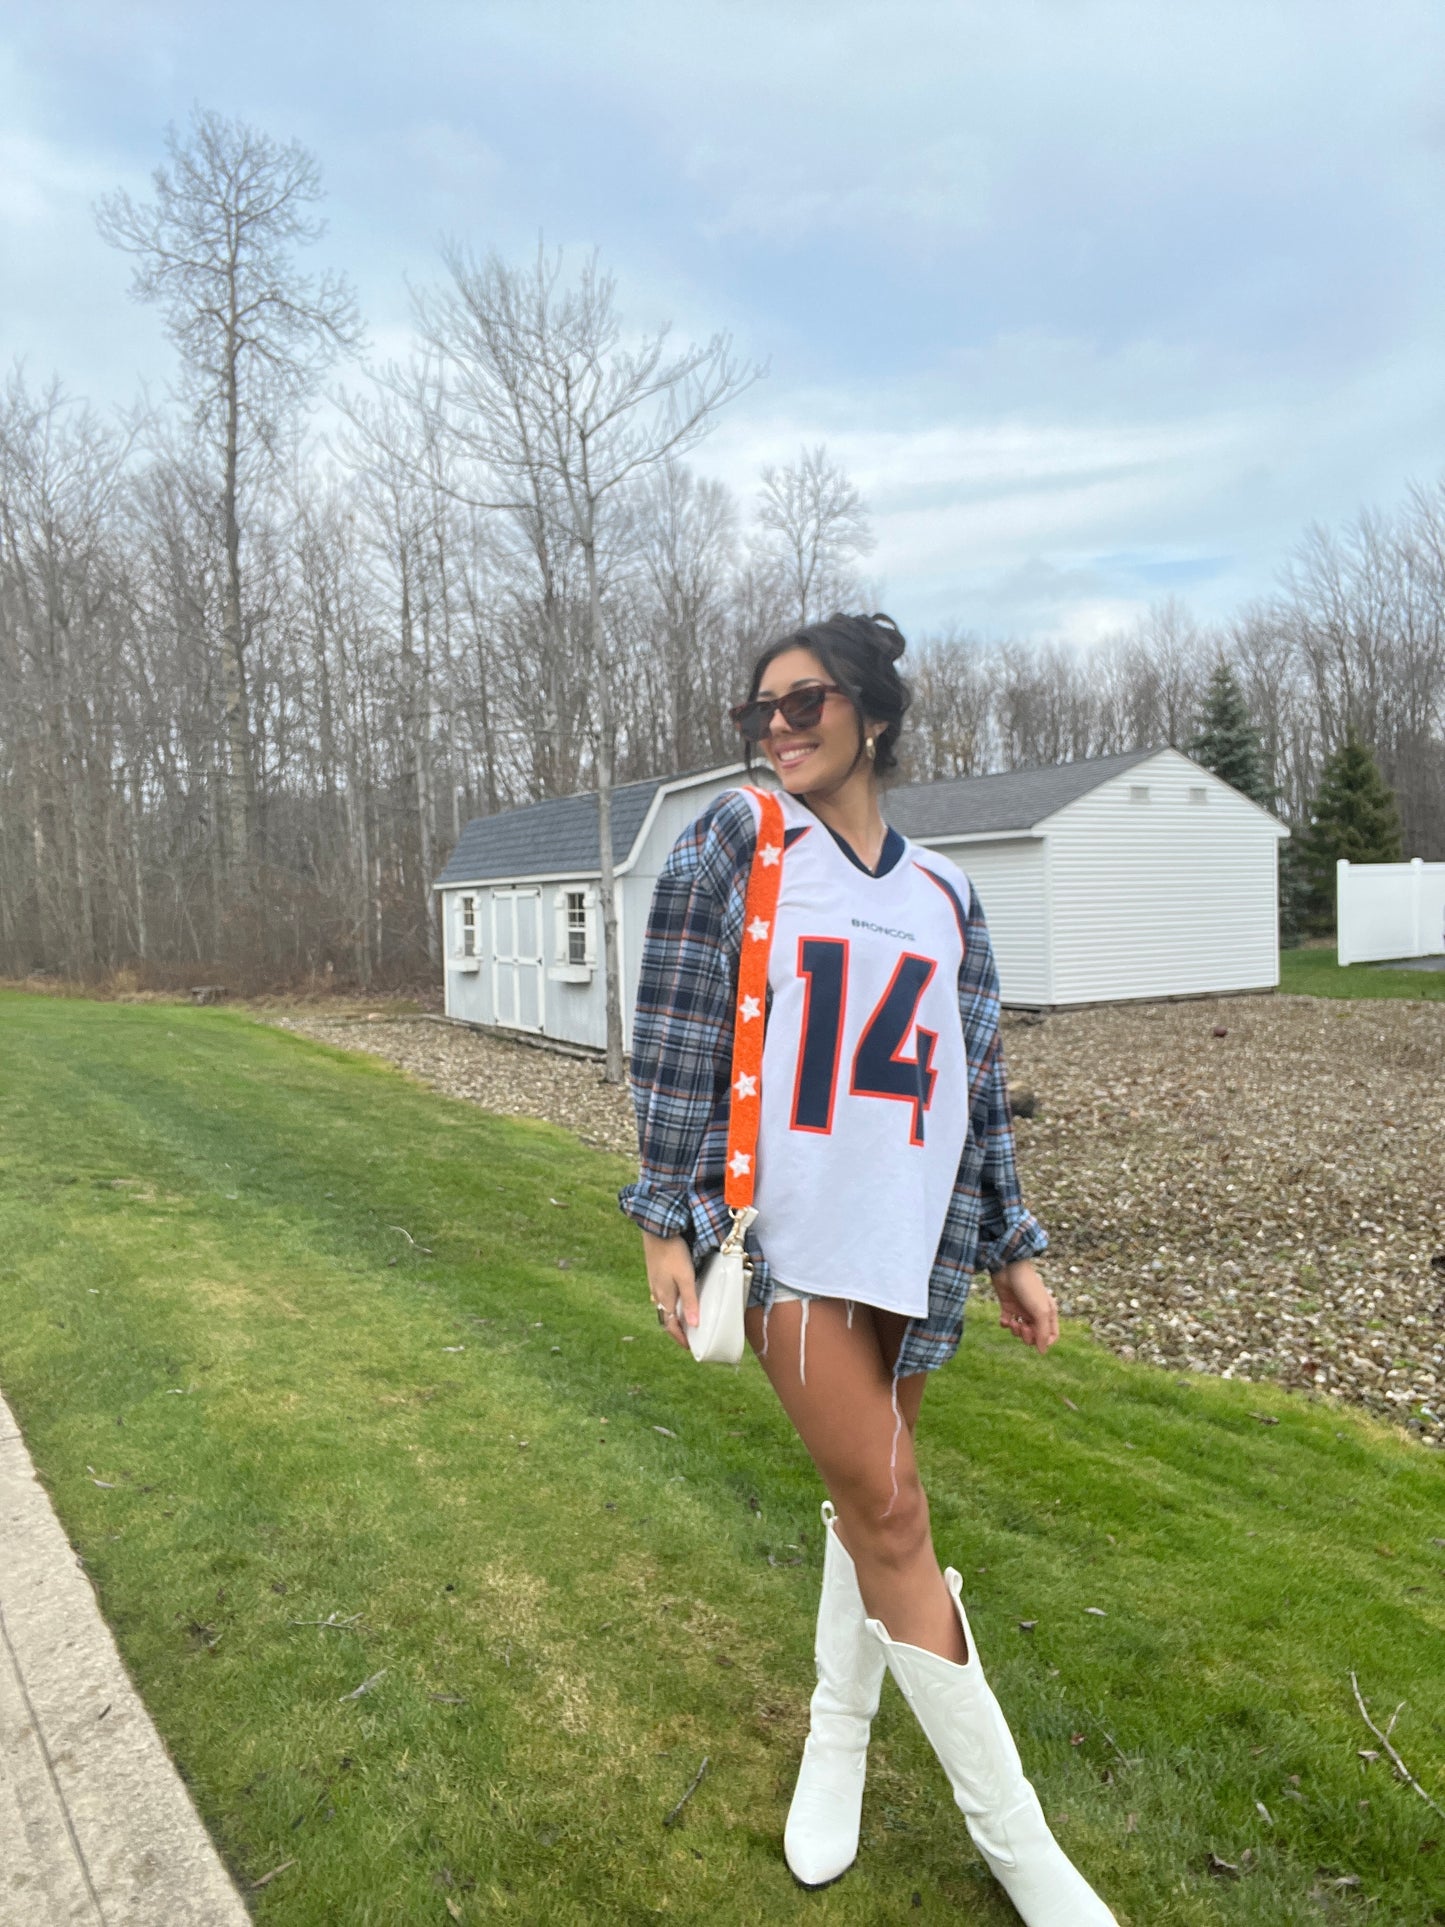 #14 GRIESE BRONCOS JERSEY X FLANNEL